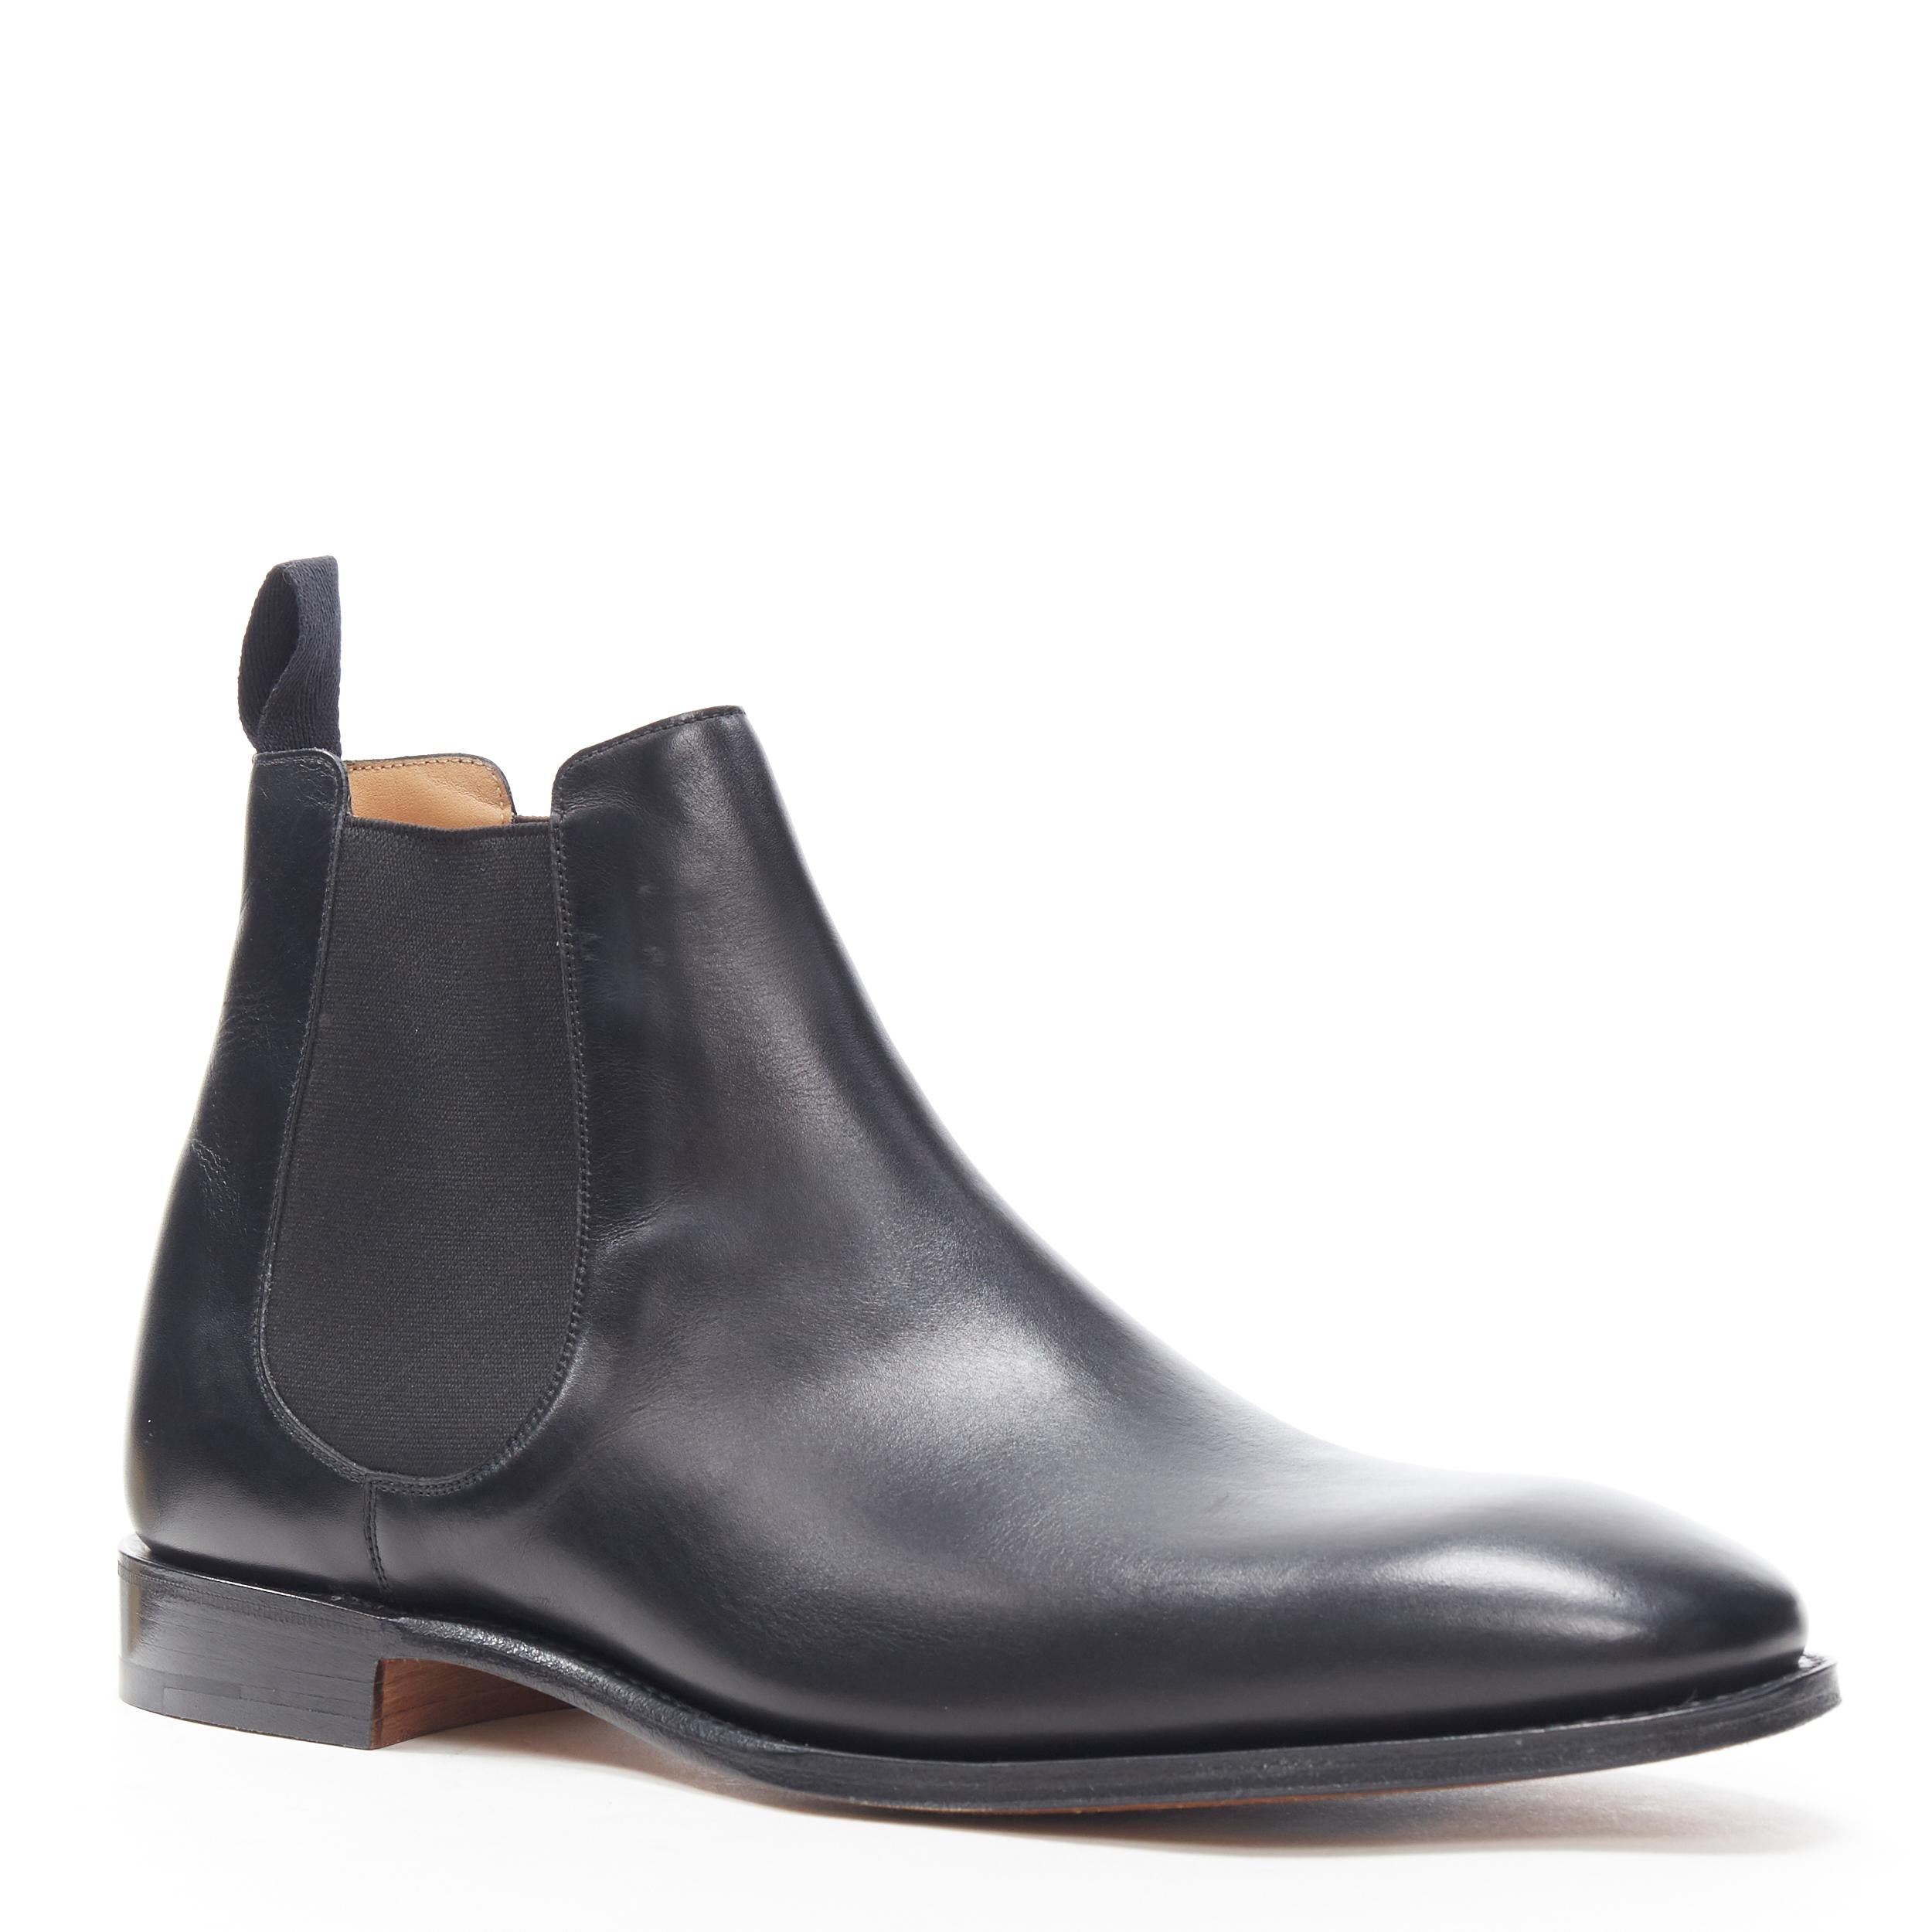 new CHURCH'S Ryehill 450 black calf leather round chelsea ankle boots UK10 EU44
Brand: Churchs
Model Name / Style: Ryehill
Material: Leather
Color: Black
Pattern: Solid
Extra Detail: Black calf leather upper. Stacked wooden sole. Black elastic